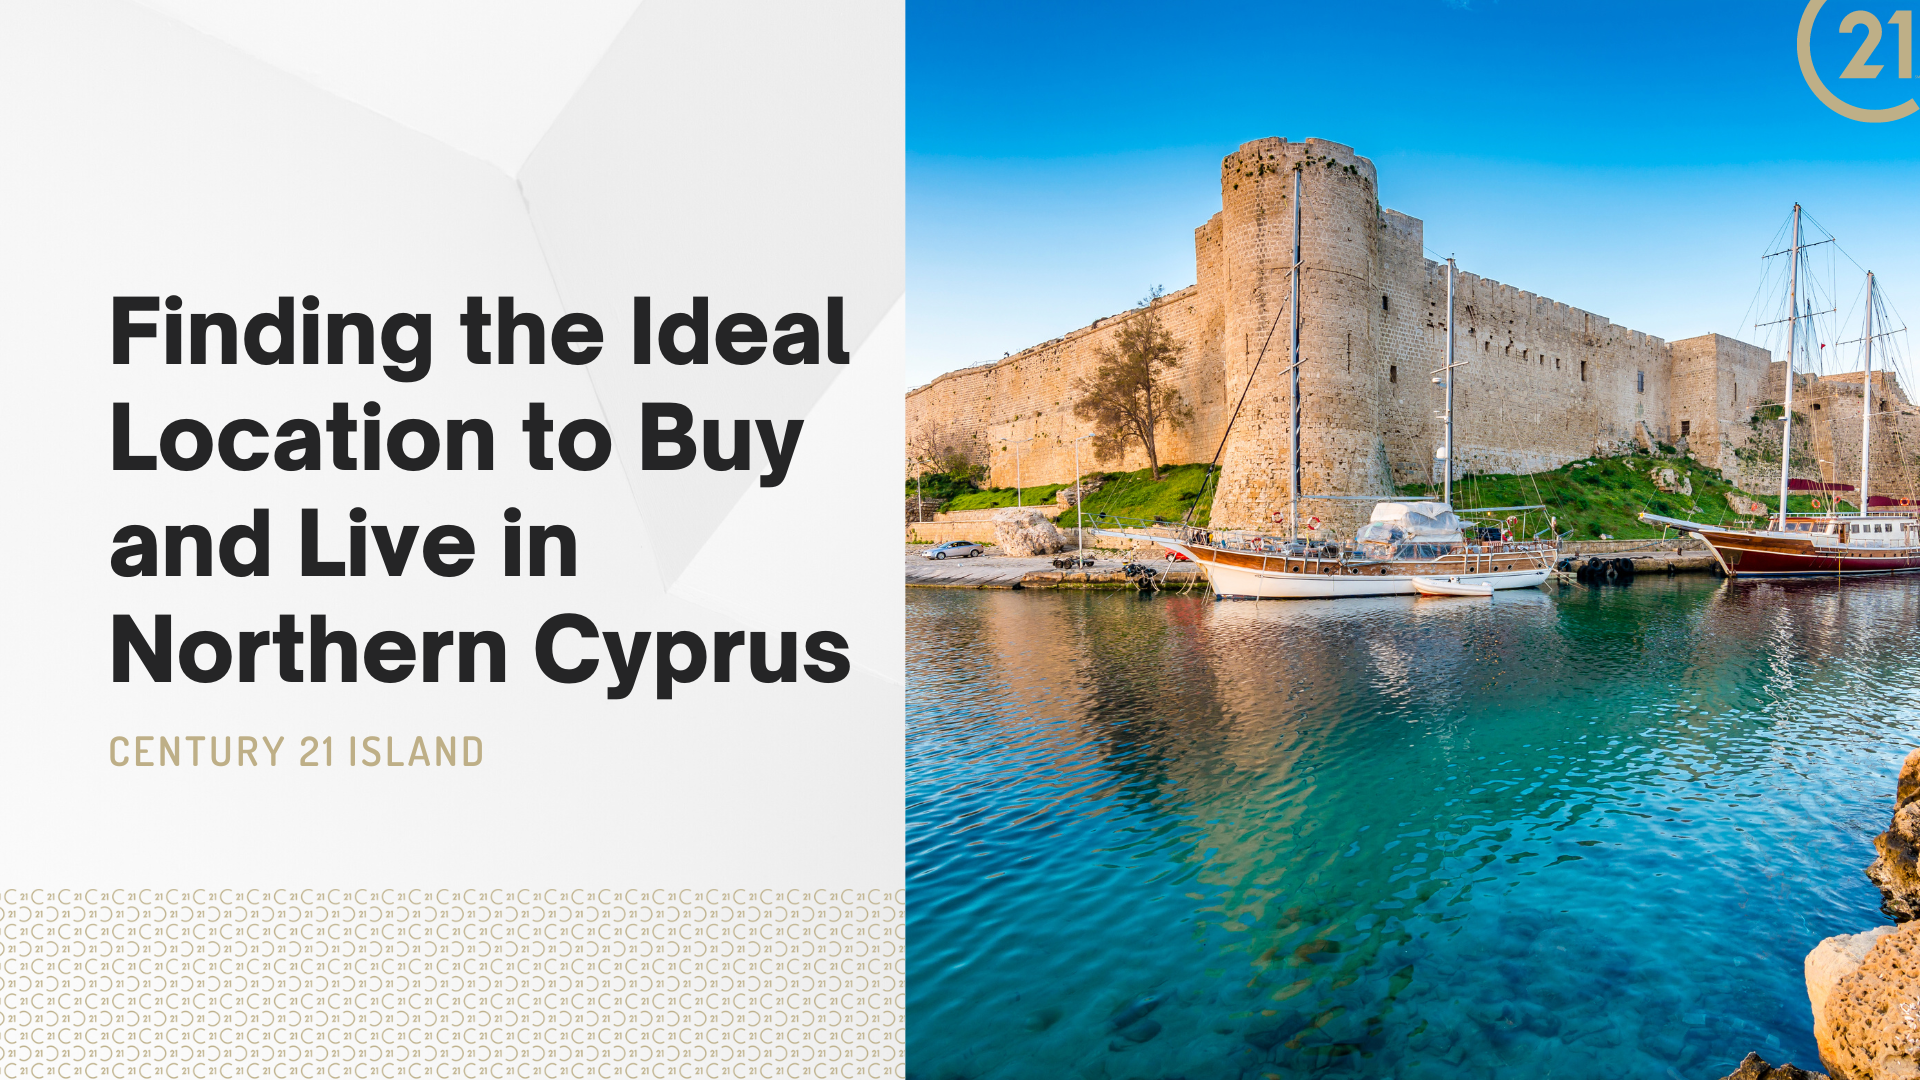 Finding the Ideal Location to Buy and Live in Northern Cyprus